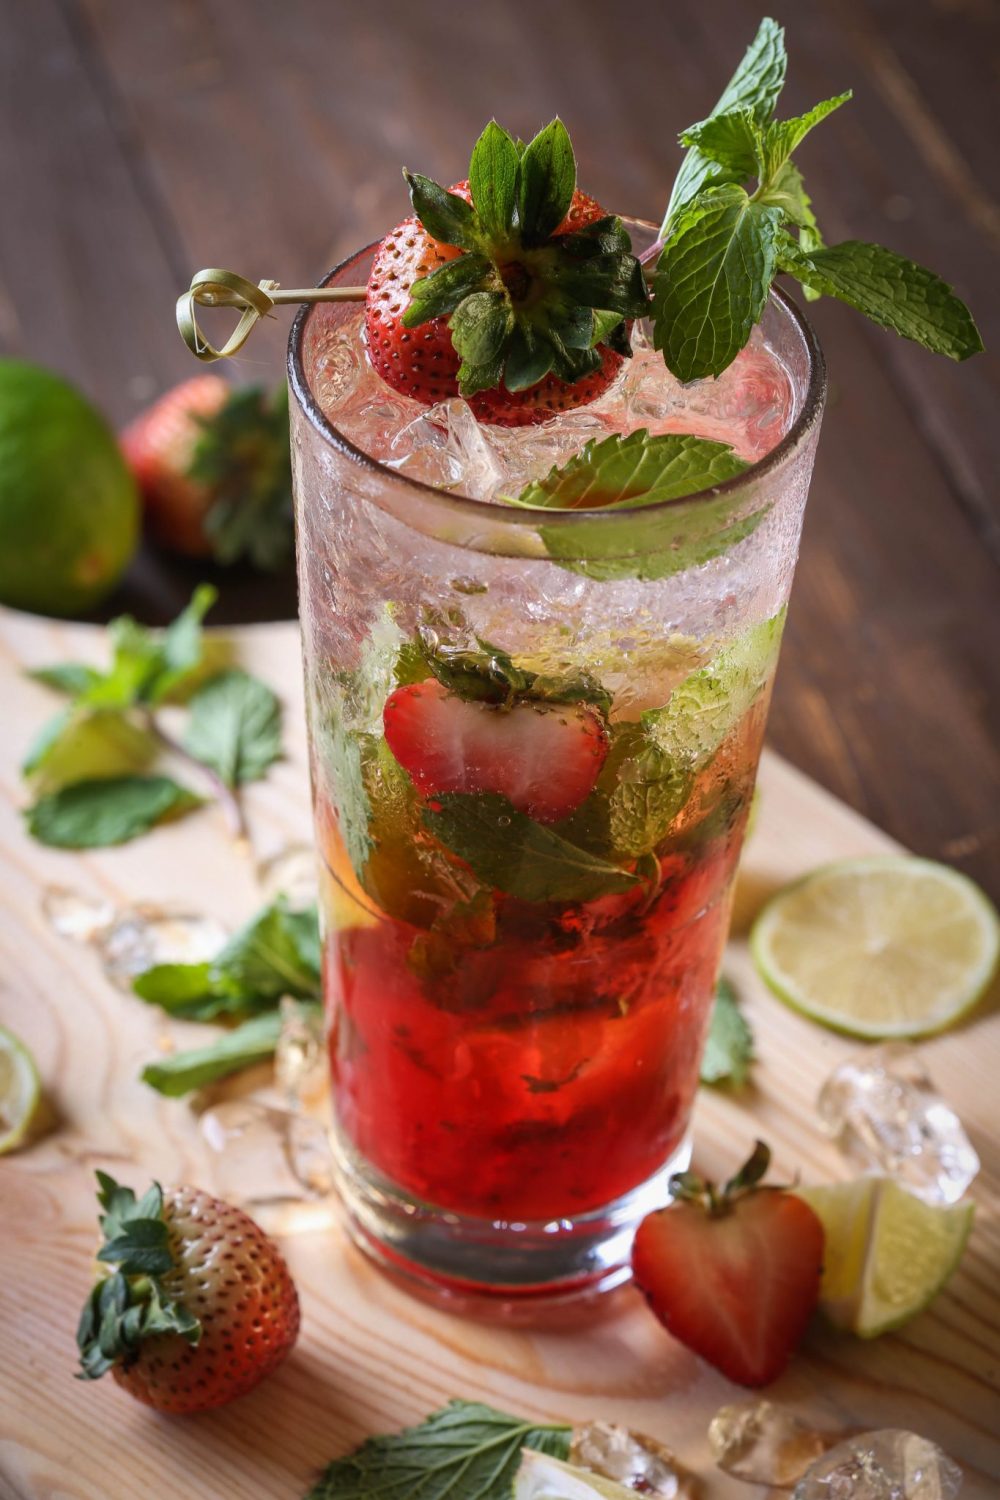 Best Non-Alcoholic Drinks for a Barbecue